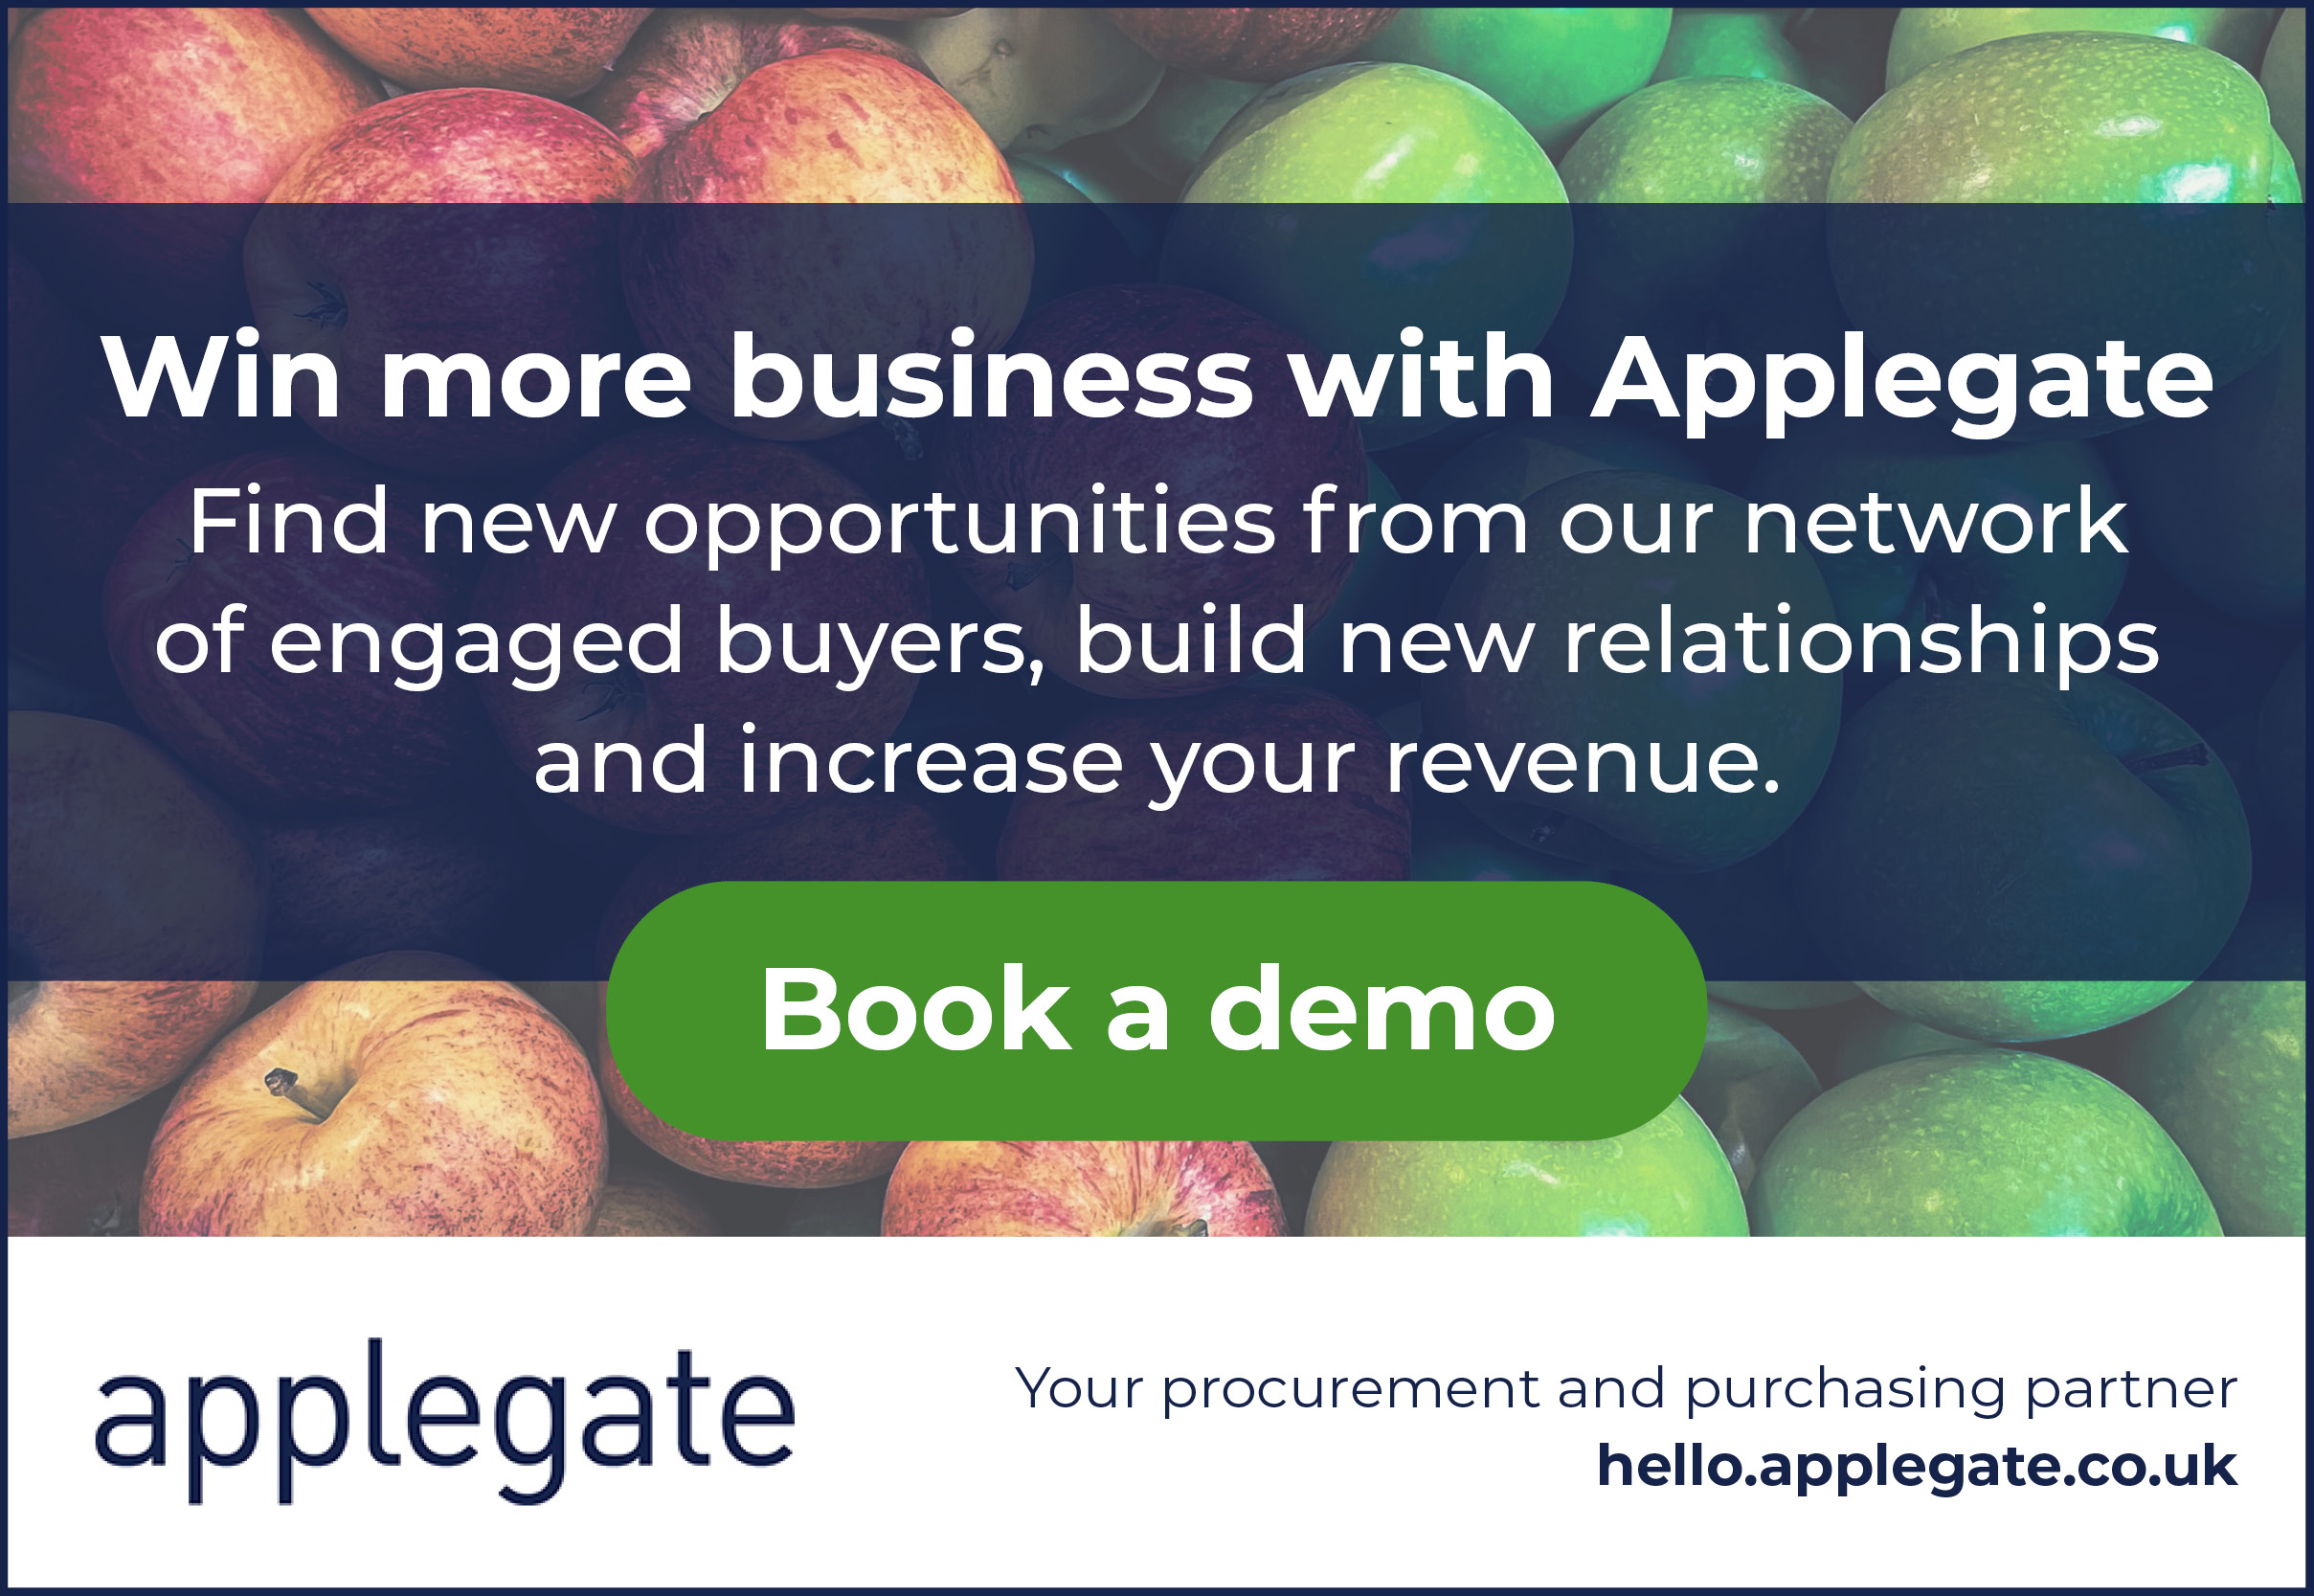 Applegate for suppliers - book a demo